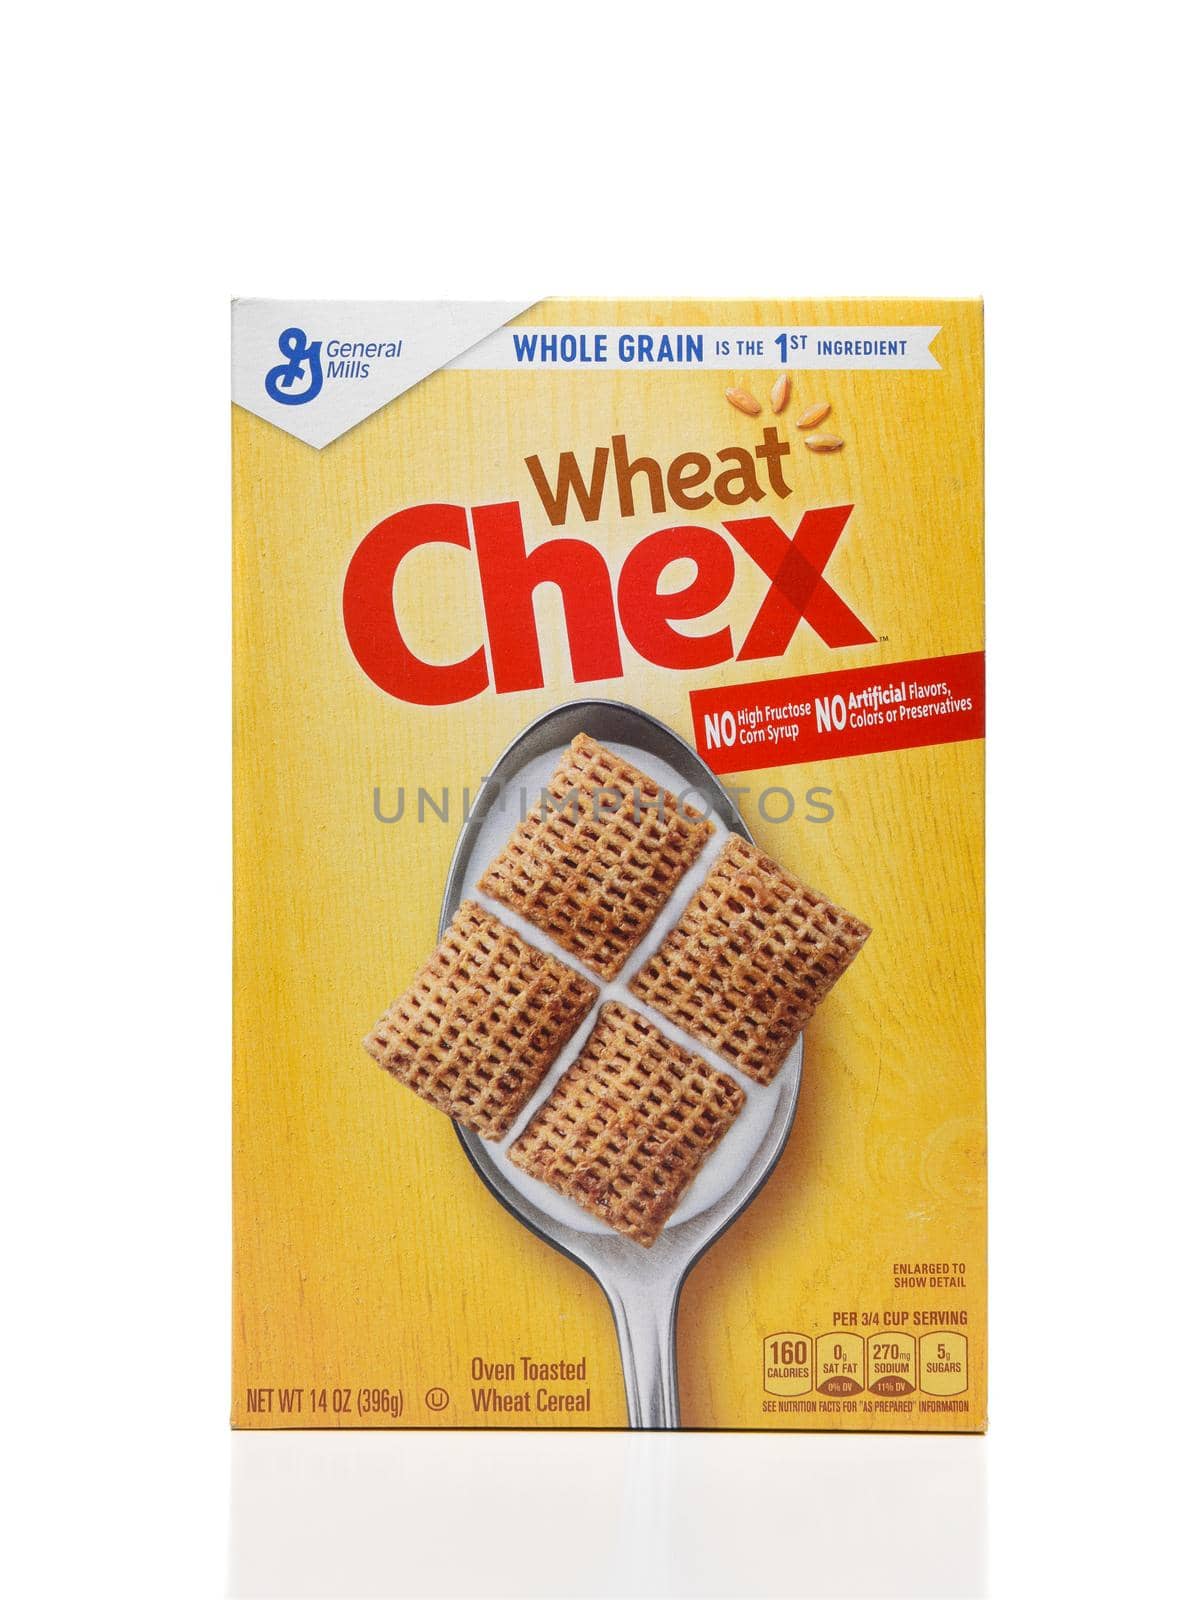 IRVINE, CALIFORNIA - AUGUST 30, 2019: A box of Wheat Chex breakfast cereal form General Mills. by sCukrov